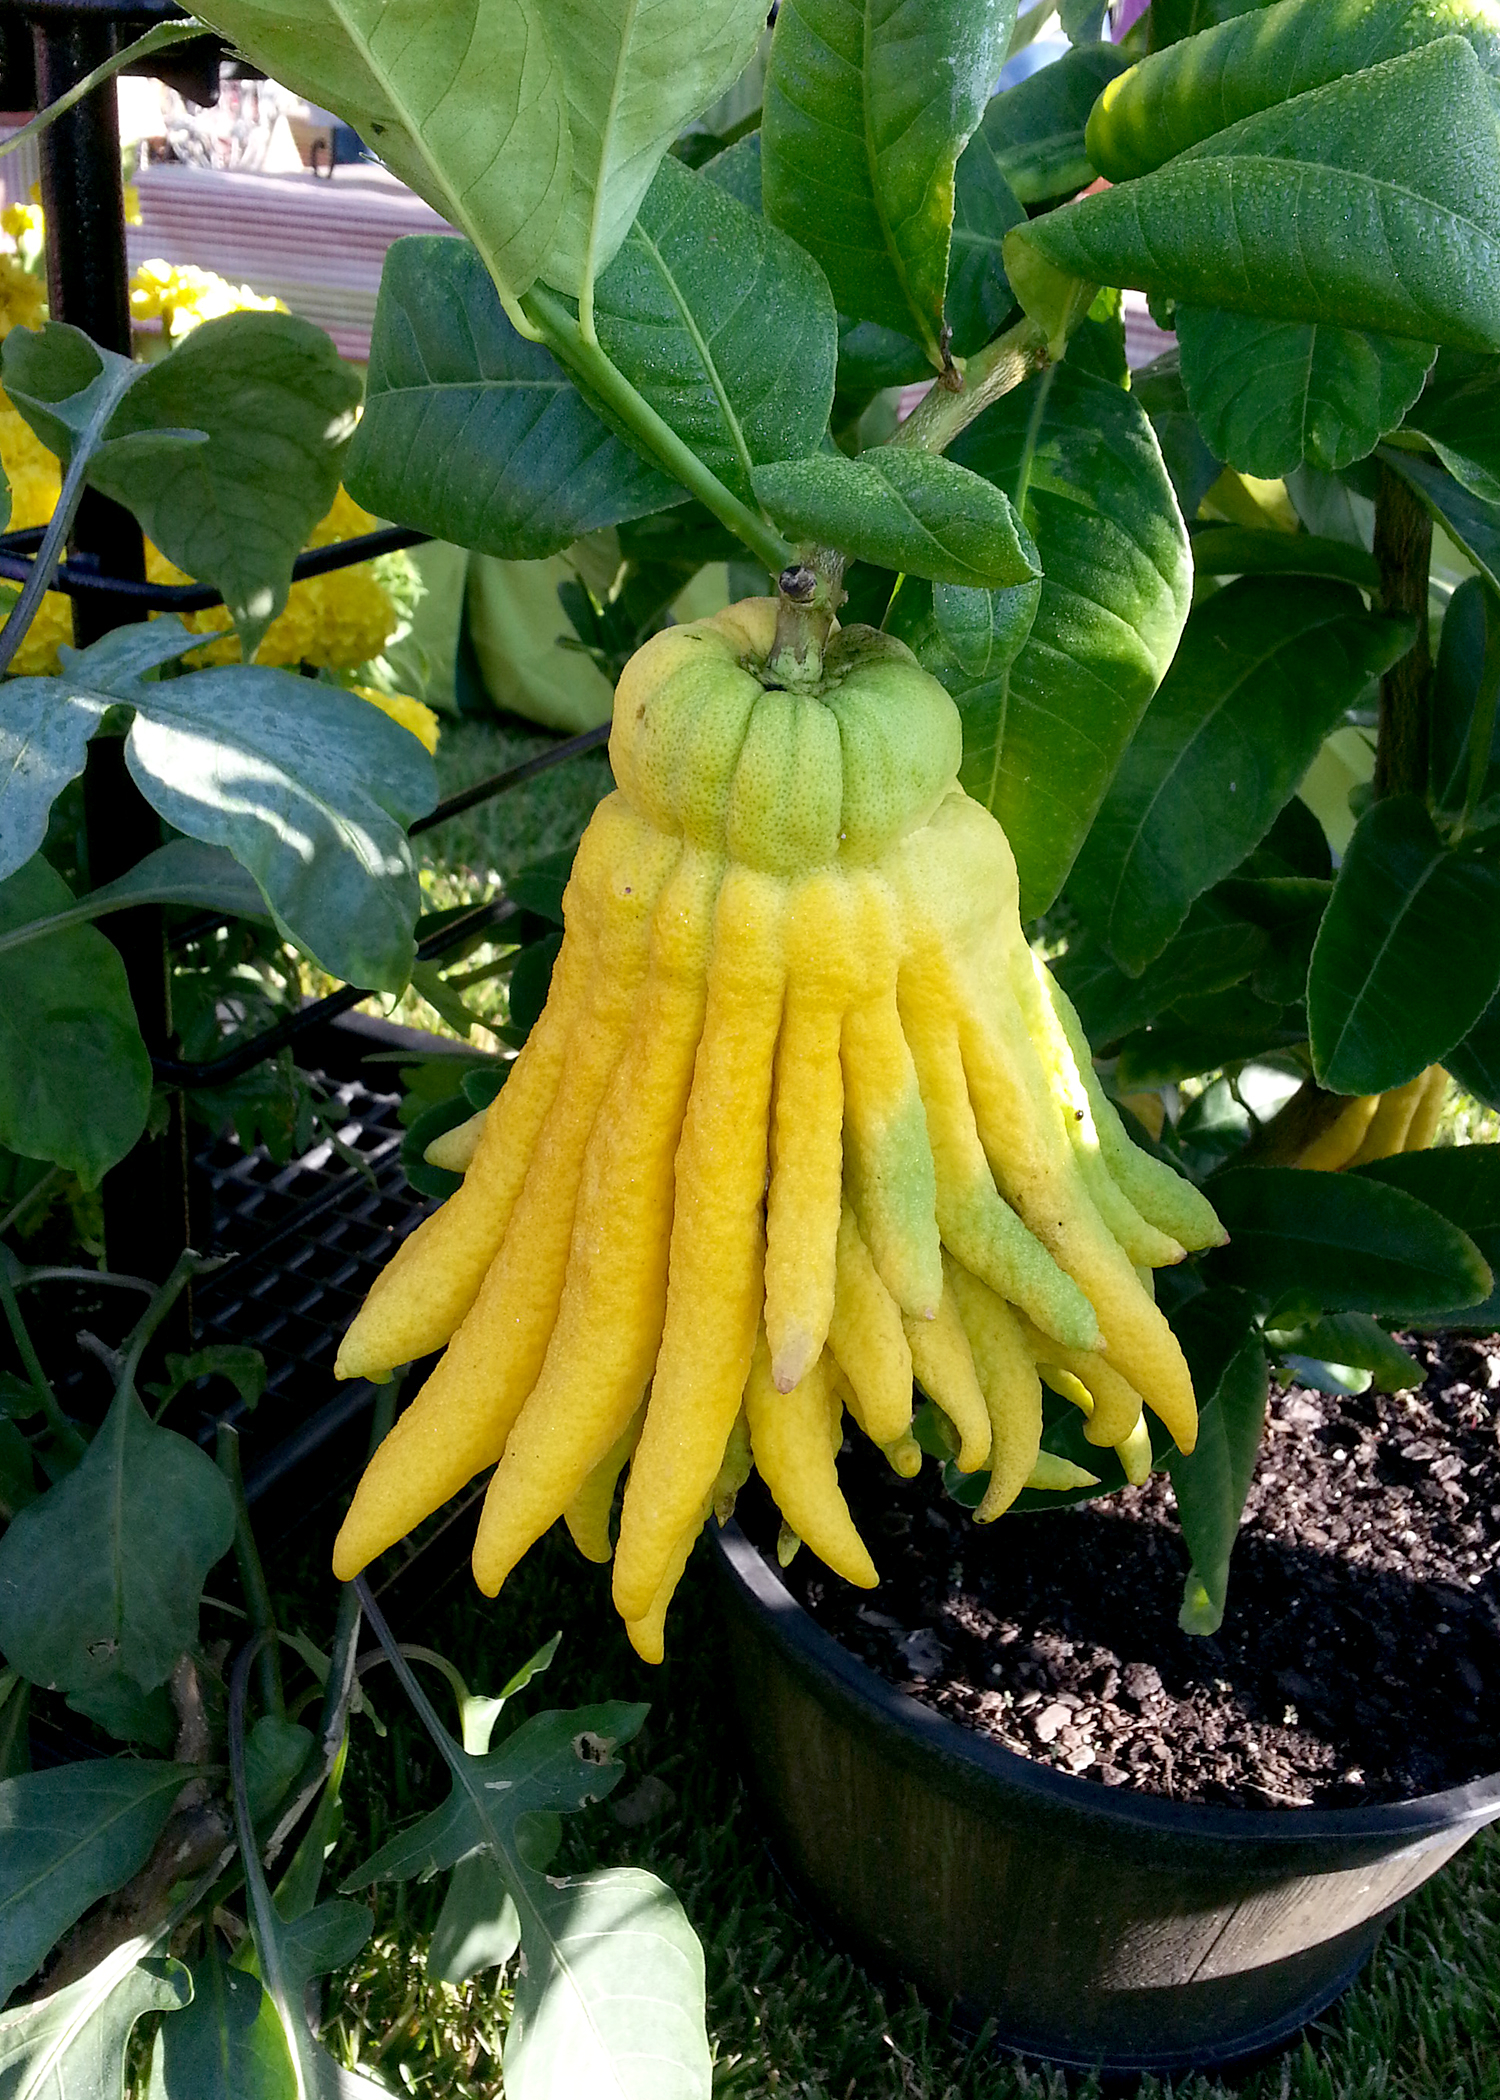 Buddha Hand is a strange-looking citrus that is used as zest for flavoring or as the strange, candied fruit in holiday cakes. (Photo by MSU Extension/Gary Bachman)